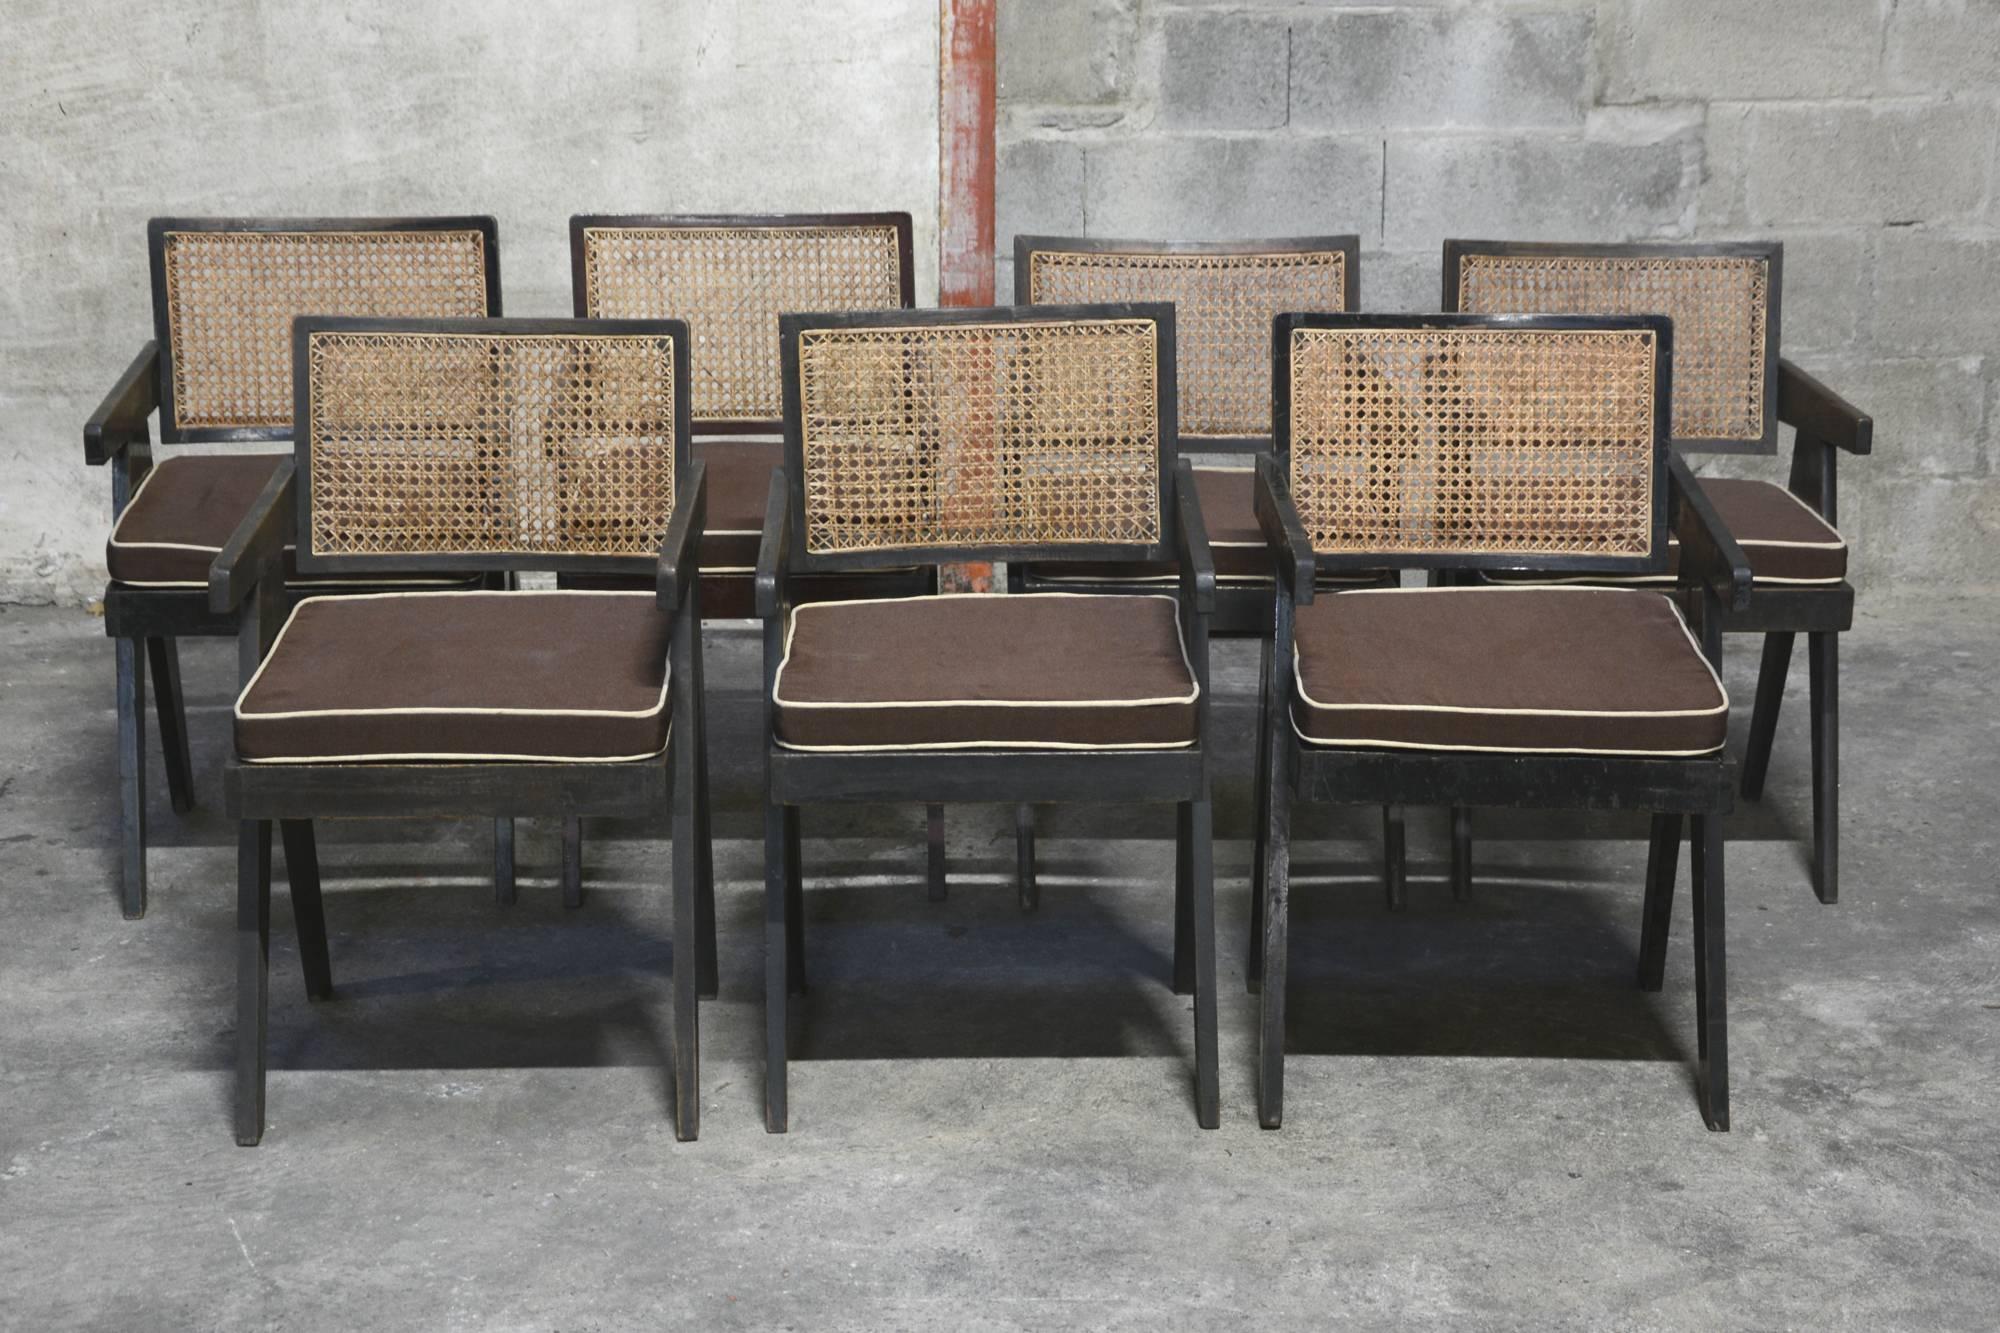 Indian Pierre Jeanneret, Rare Set of five Office Chairs in Their Original Condition